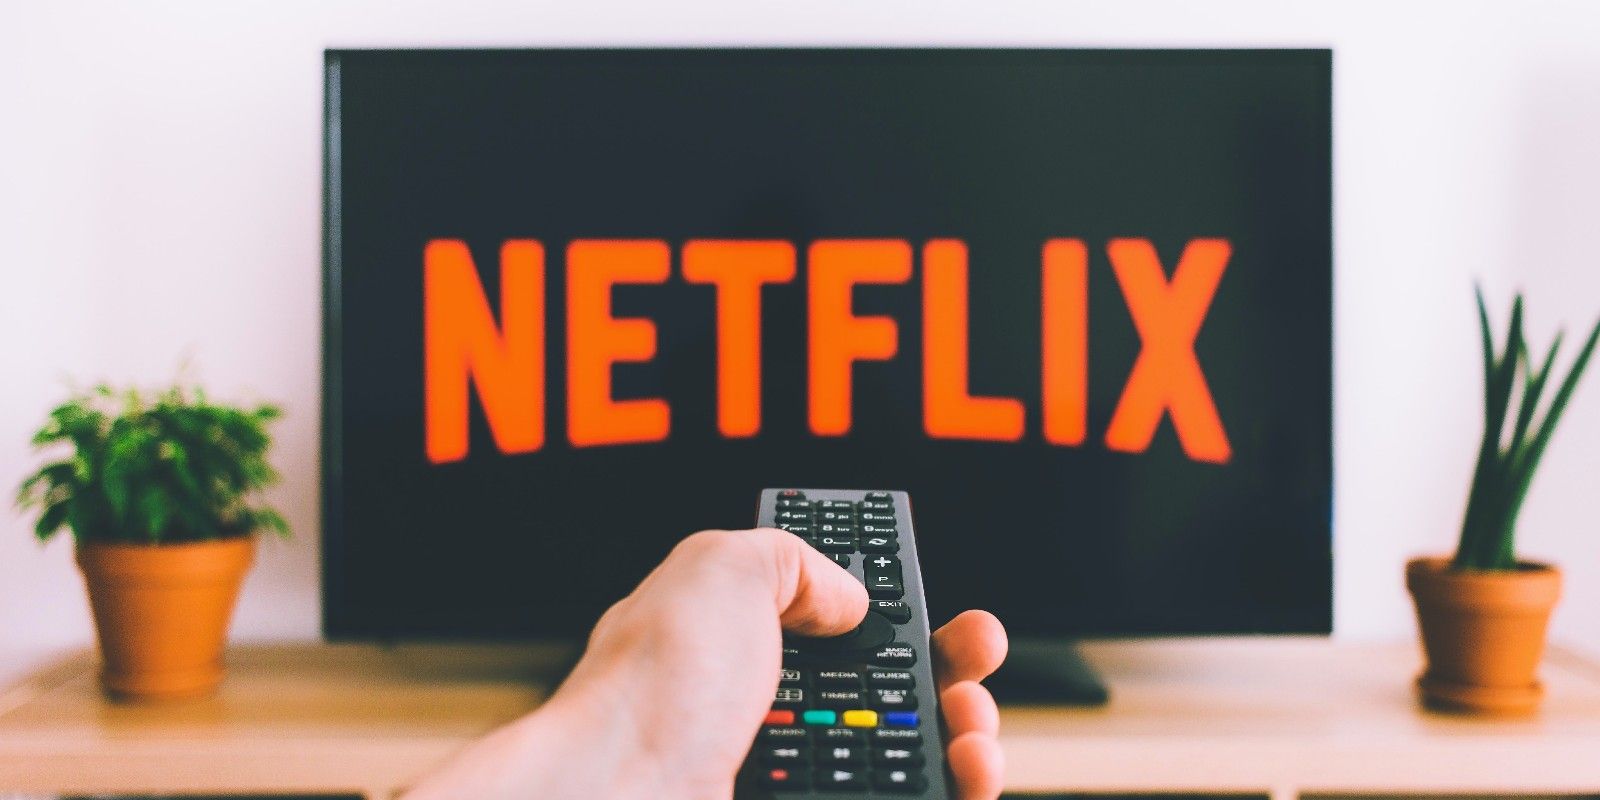 Over Half of Netflix Subscribers Share Their Password Claims Study